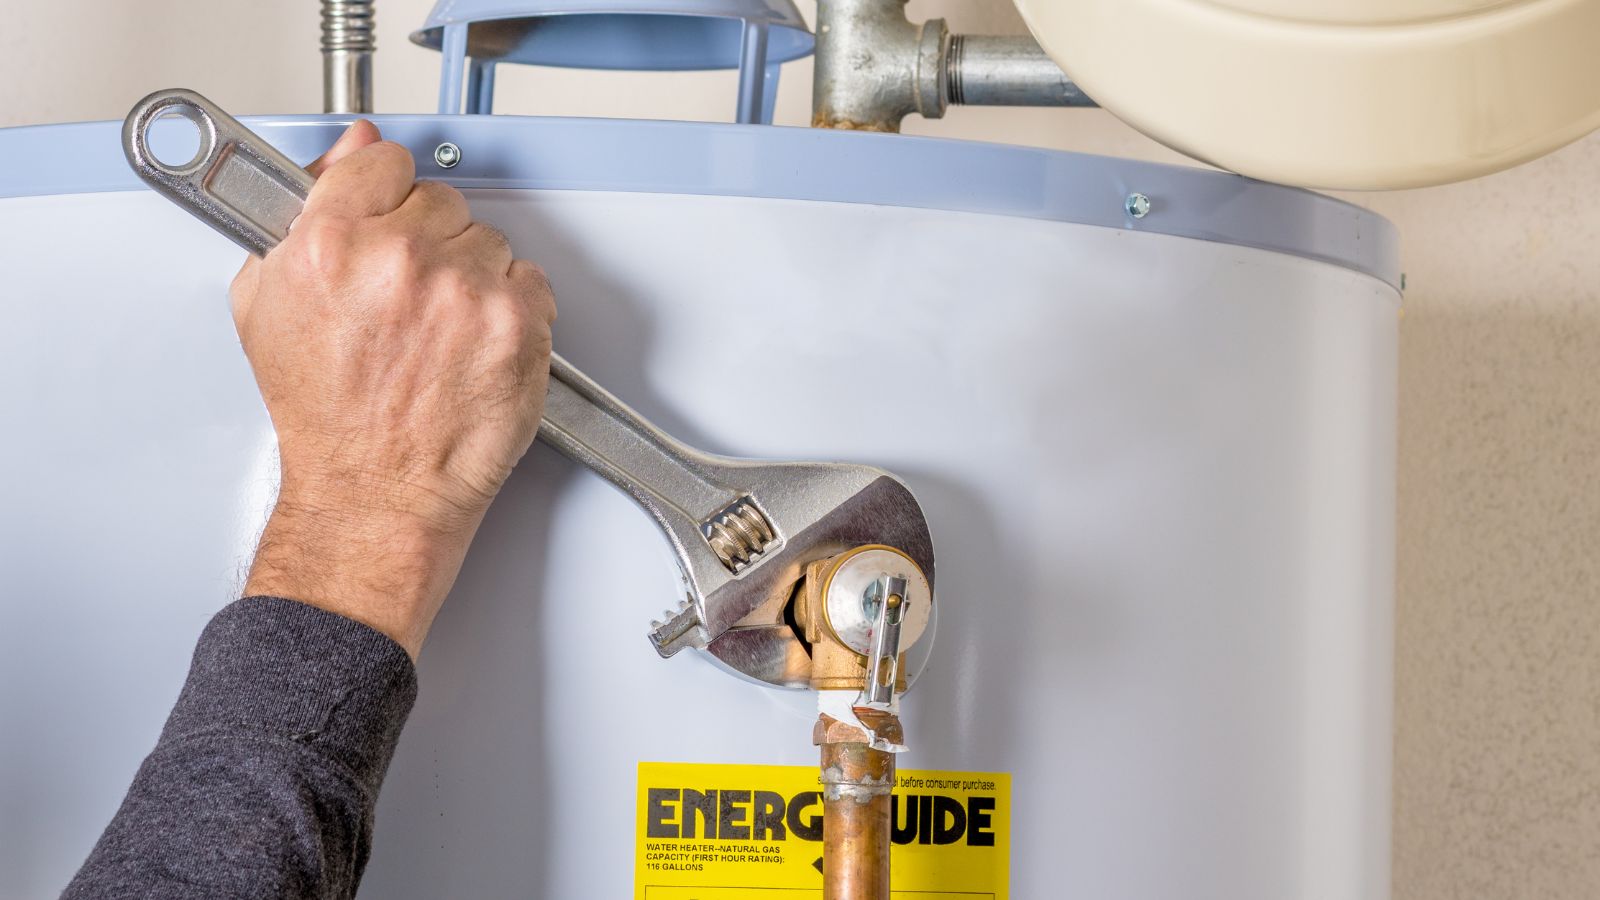 Water Heater Maintenance Tips to Keep it Going Strong (and avoid costly replacements)